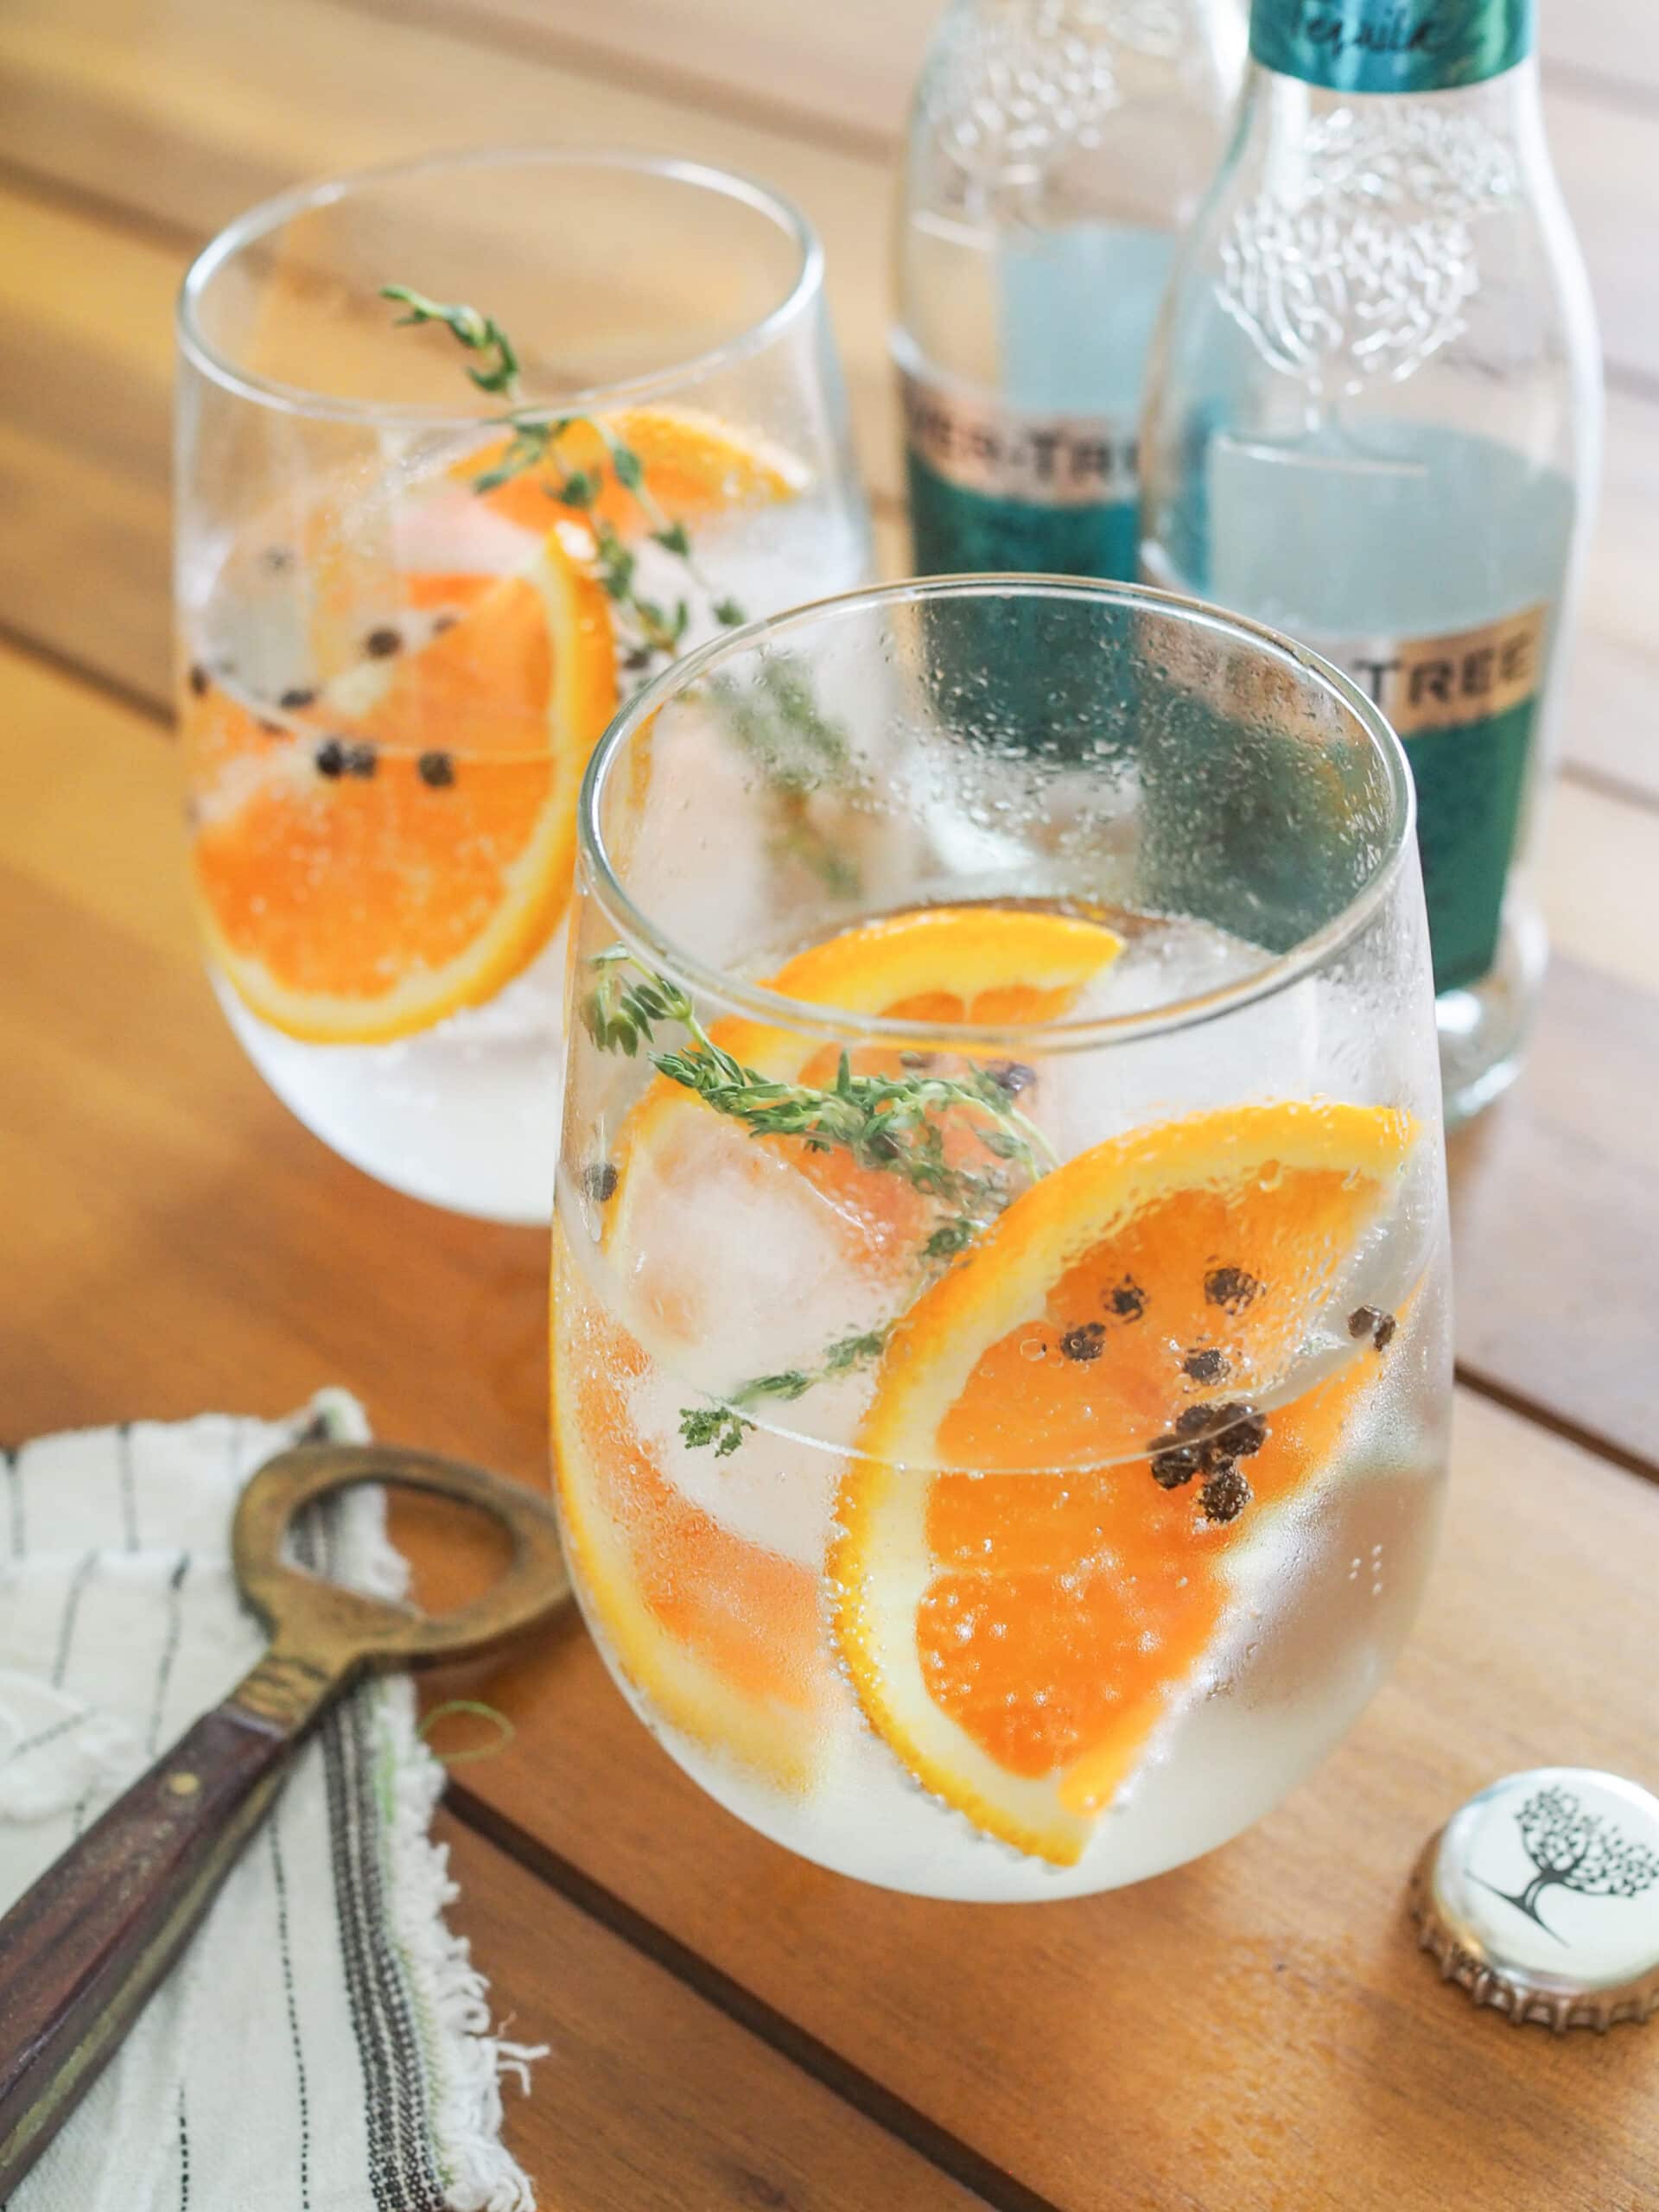 https://thetravelbite.com/wp-content/uploads/2020/09/Gin-and-Tonic-Recipe-32-scaled.jpg